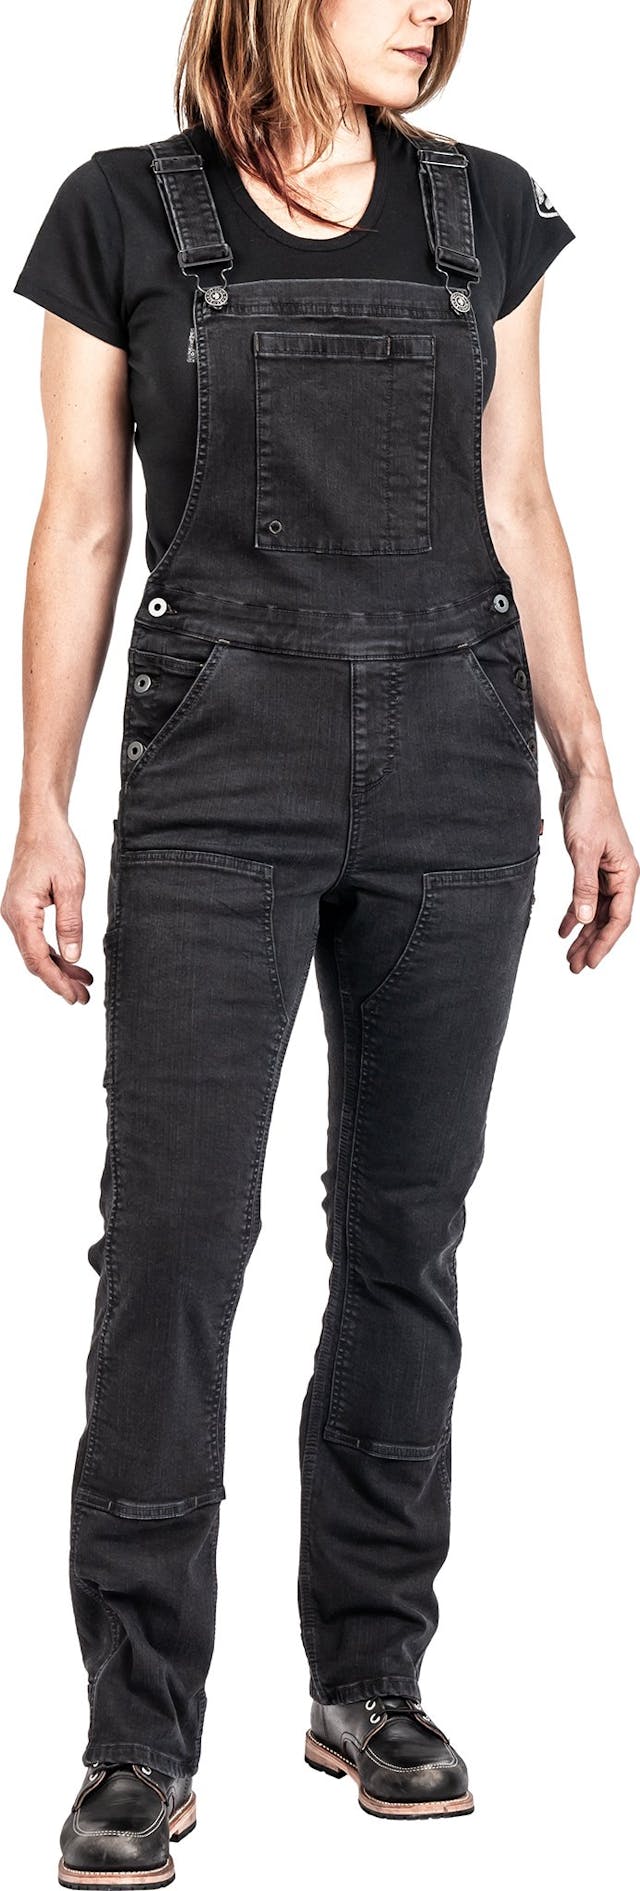 Product image for Freshley Overall Black Stretch Denim - Women's